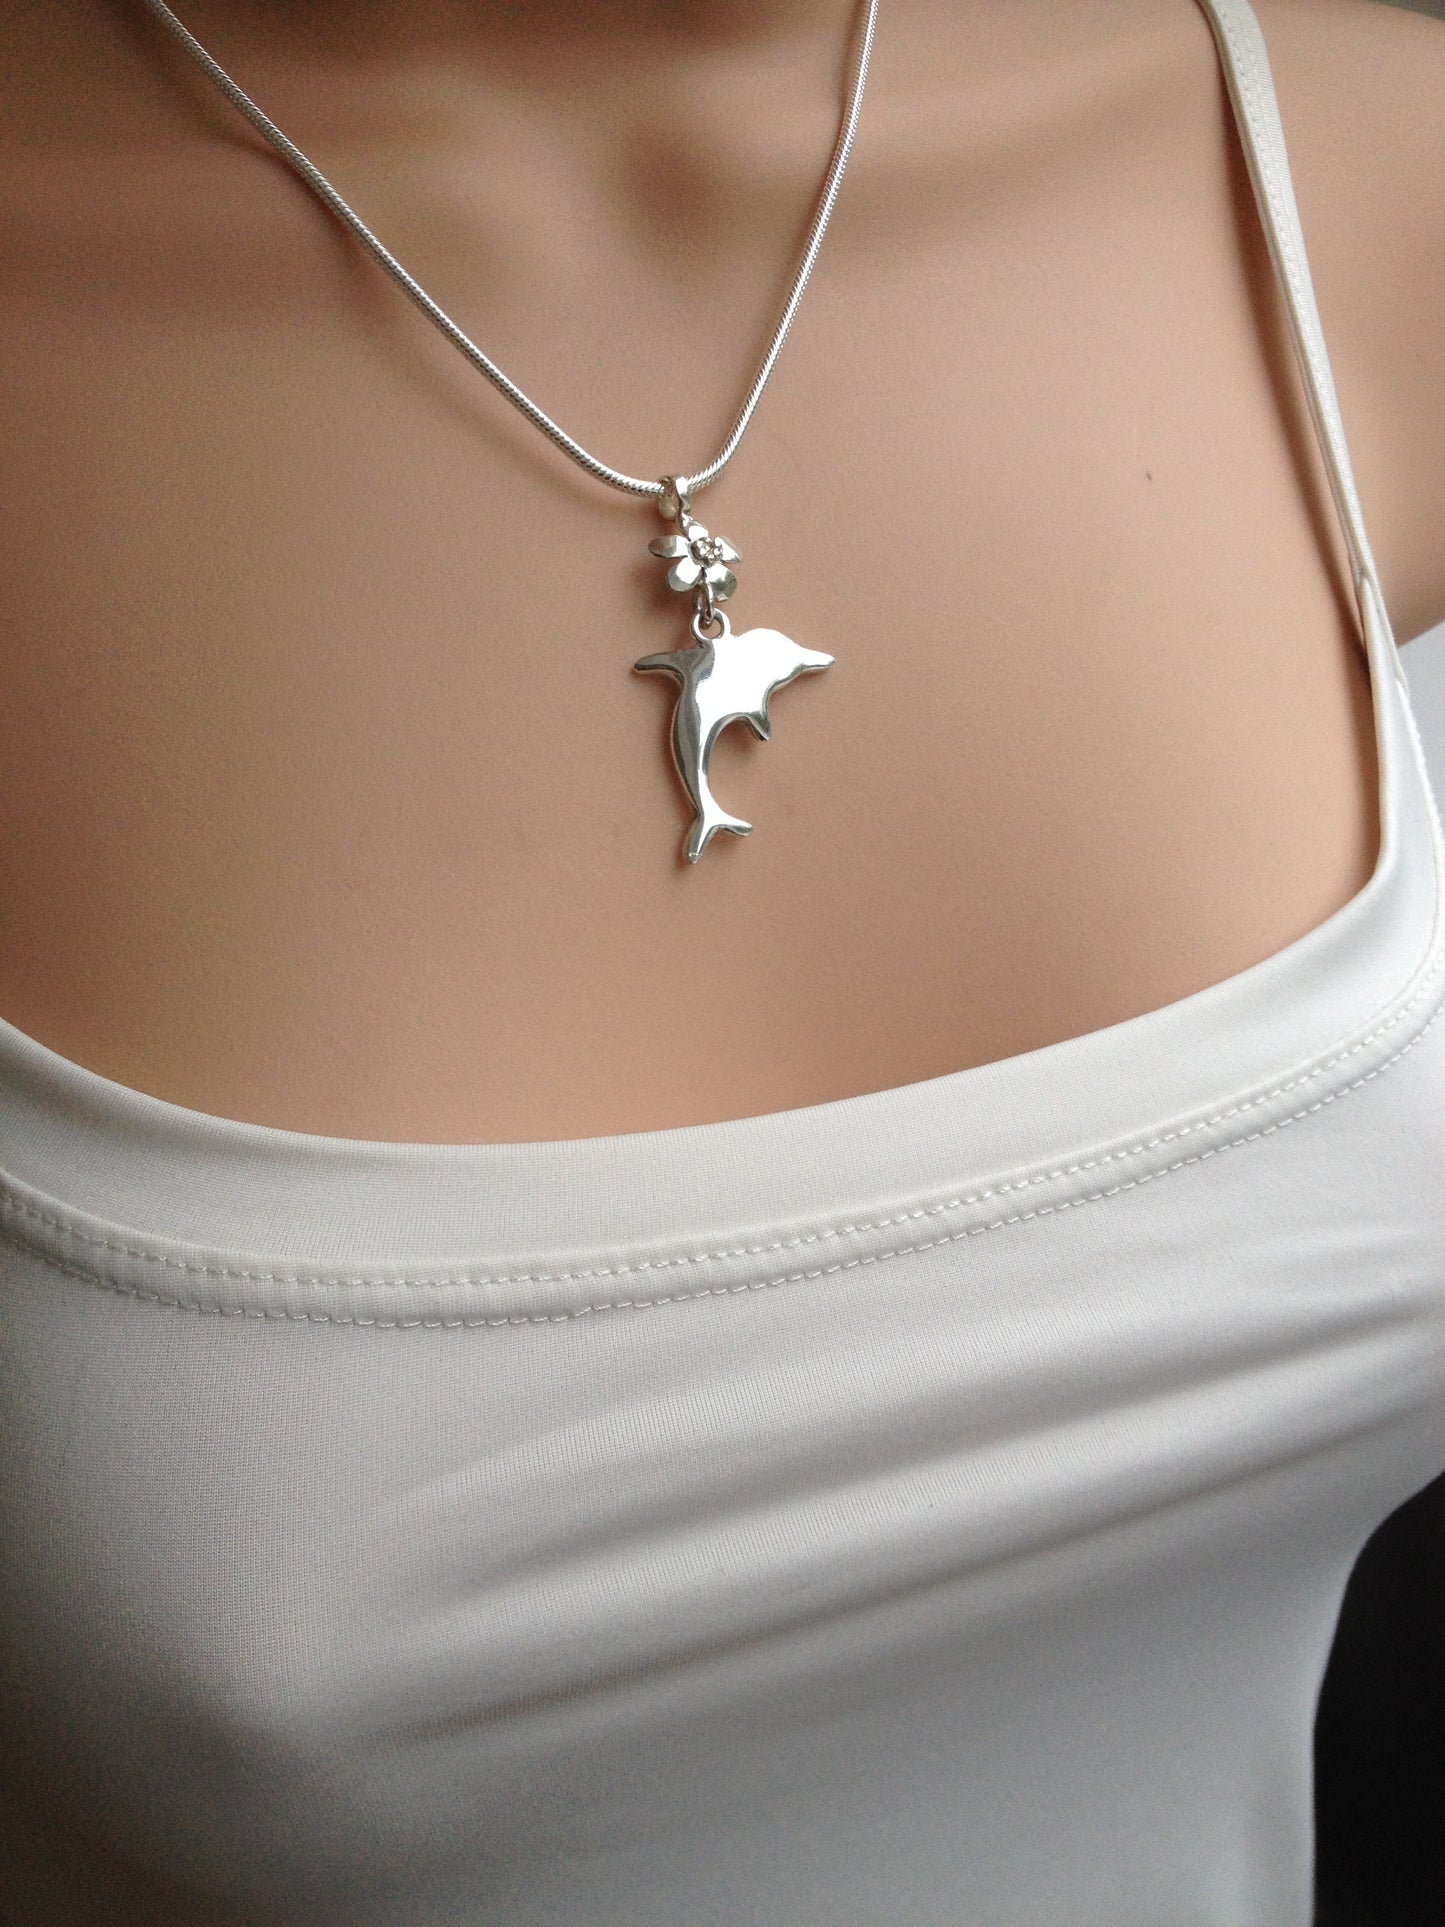 Dolphin necklace with flower